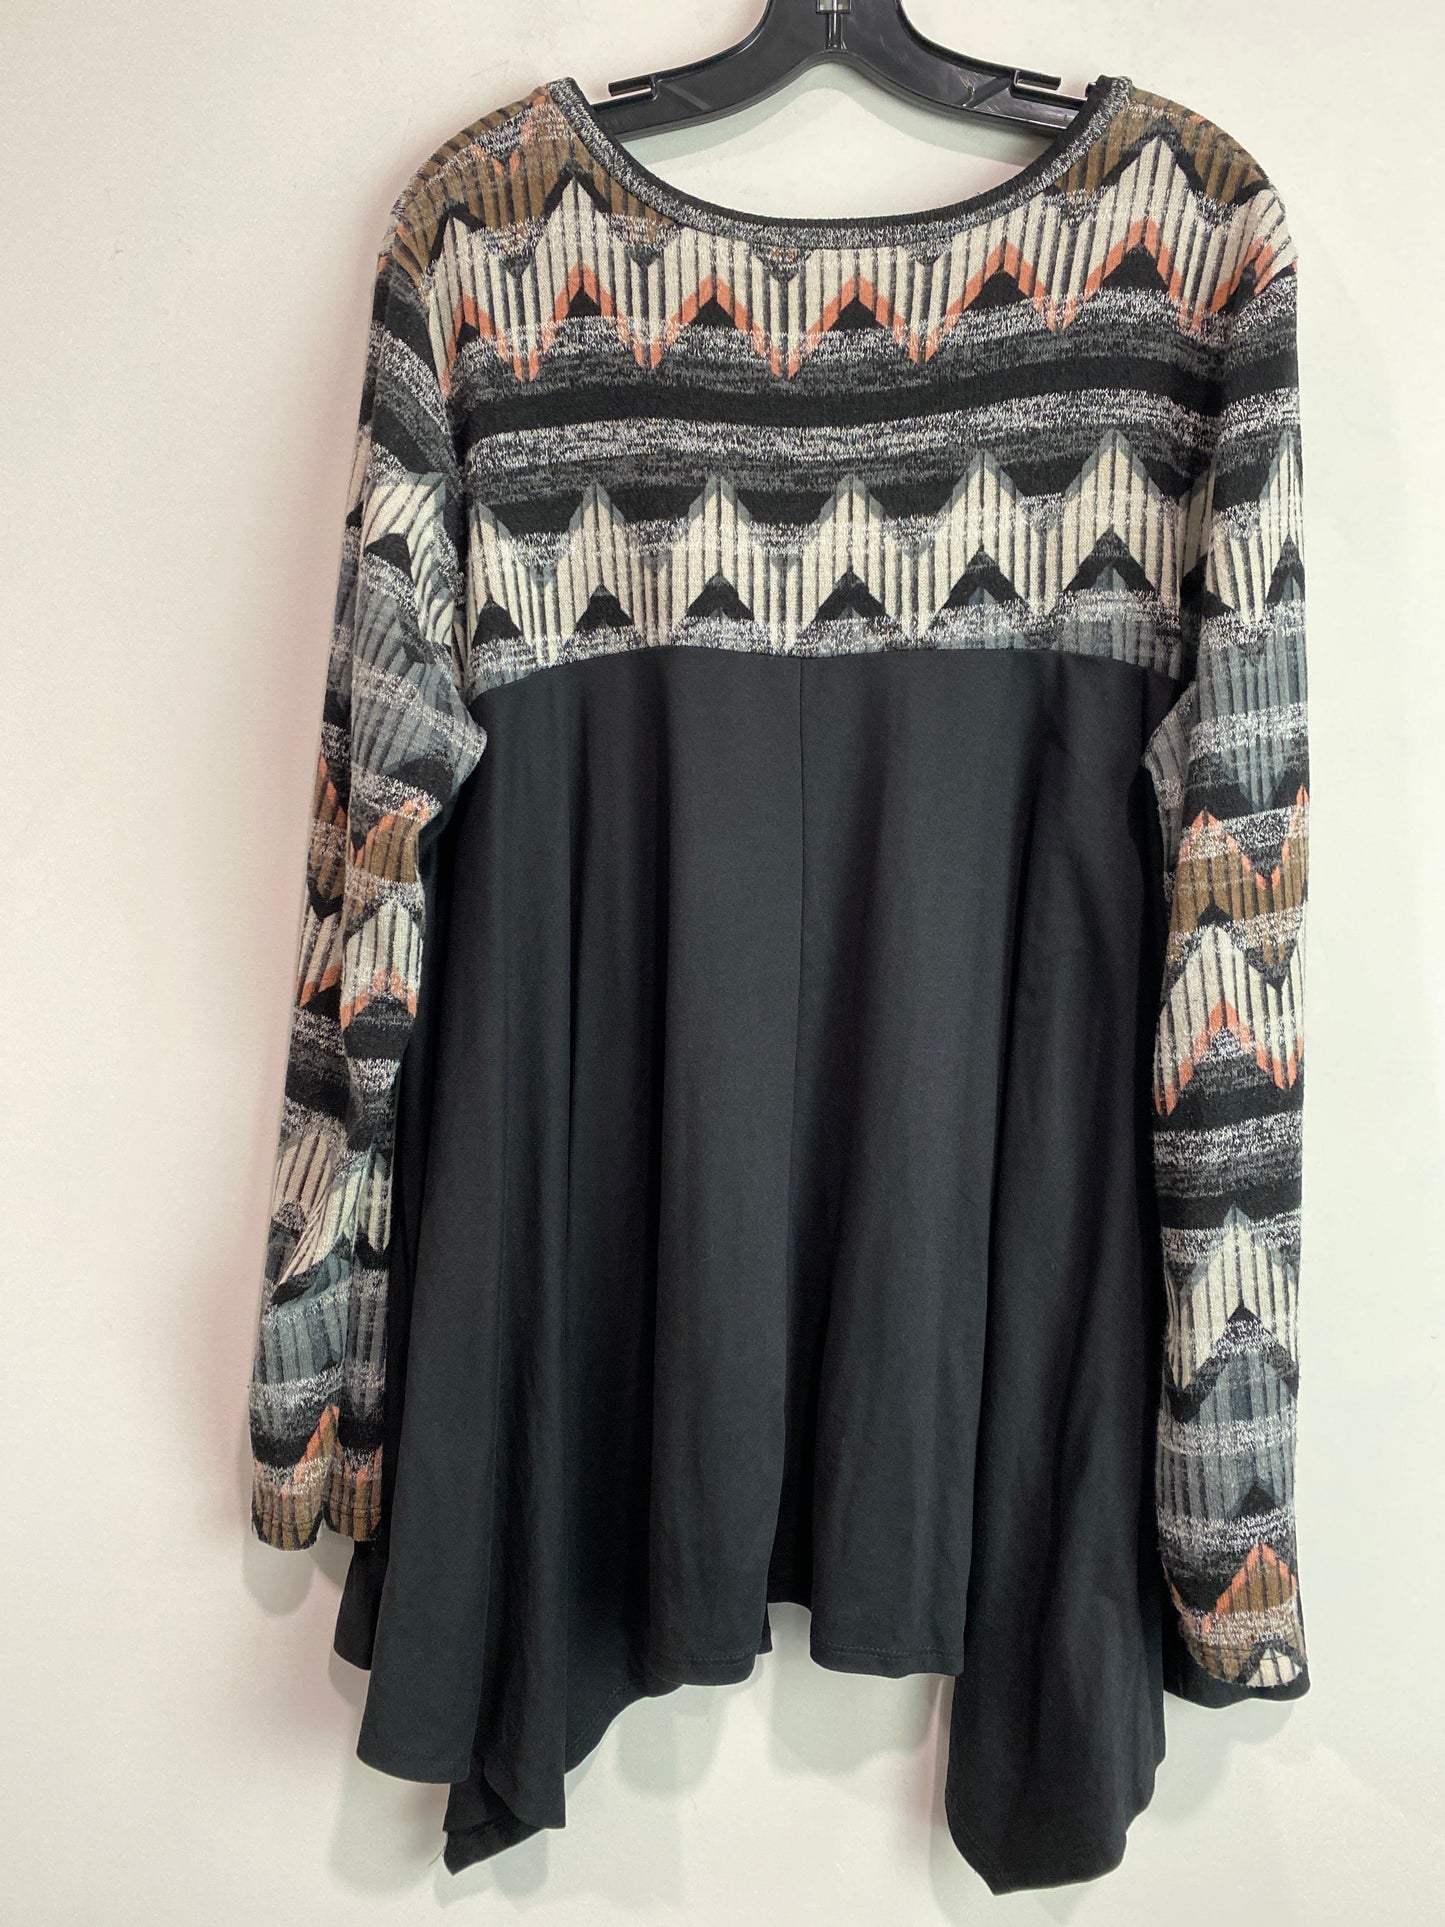 Black Top Long Sleeve Clothes Mentor, Size 3x